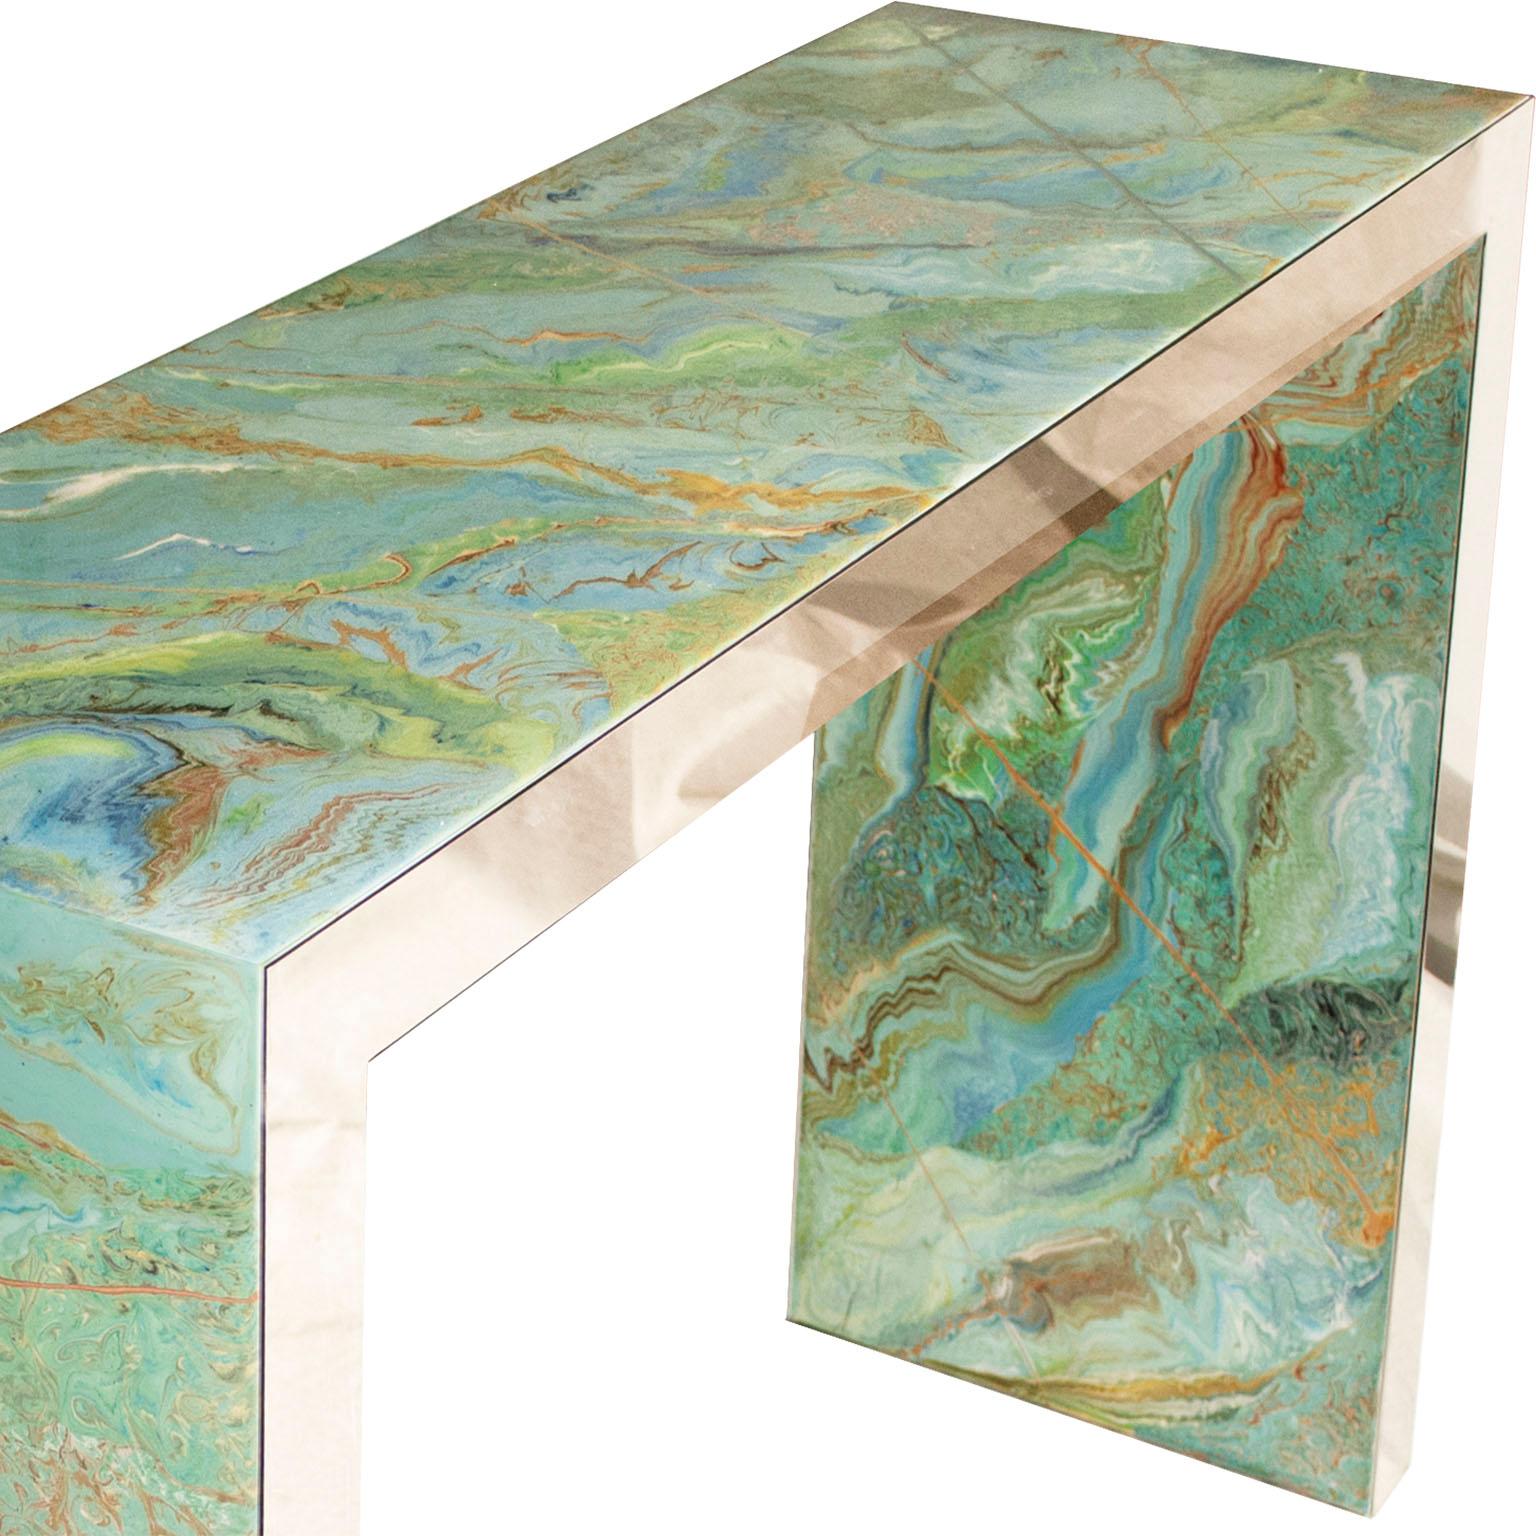 Polished Modern Console Table Marbled Green Scagliola Art Decoration Handmade Steel Frame